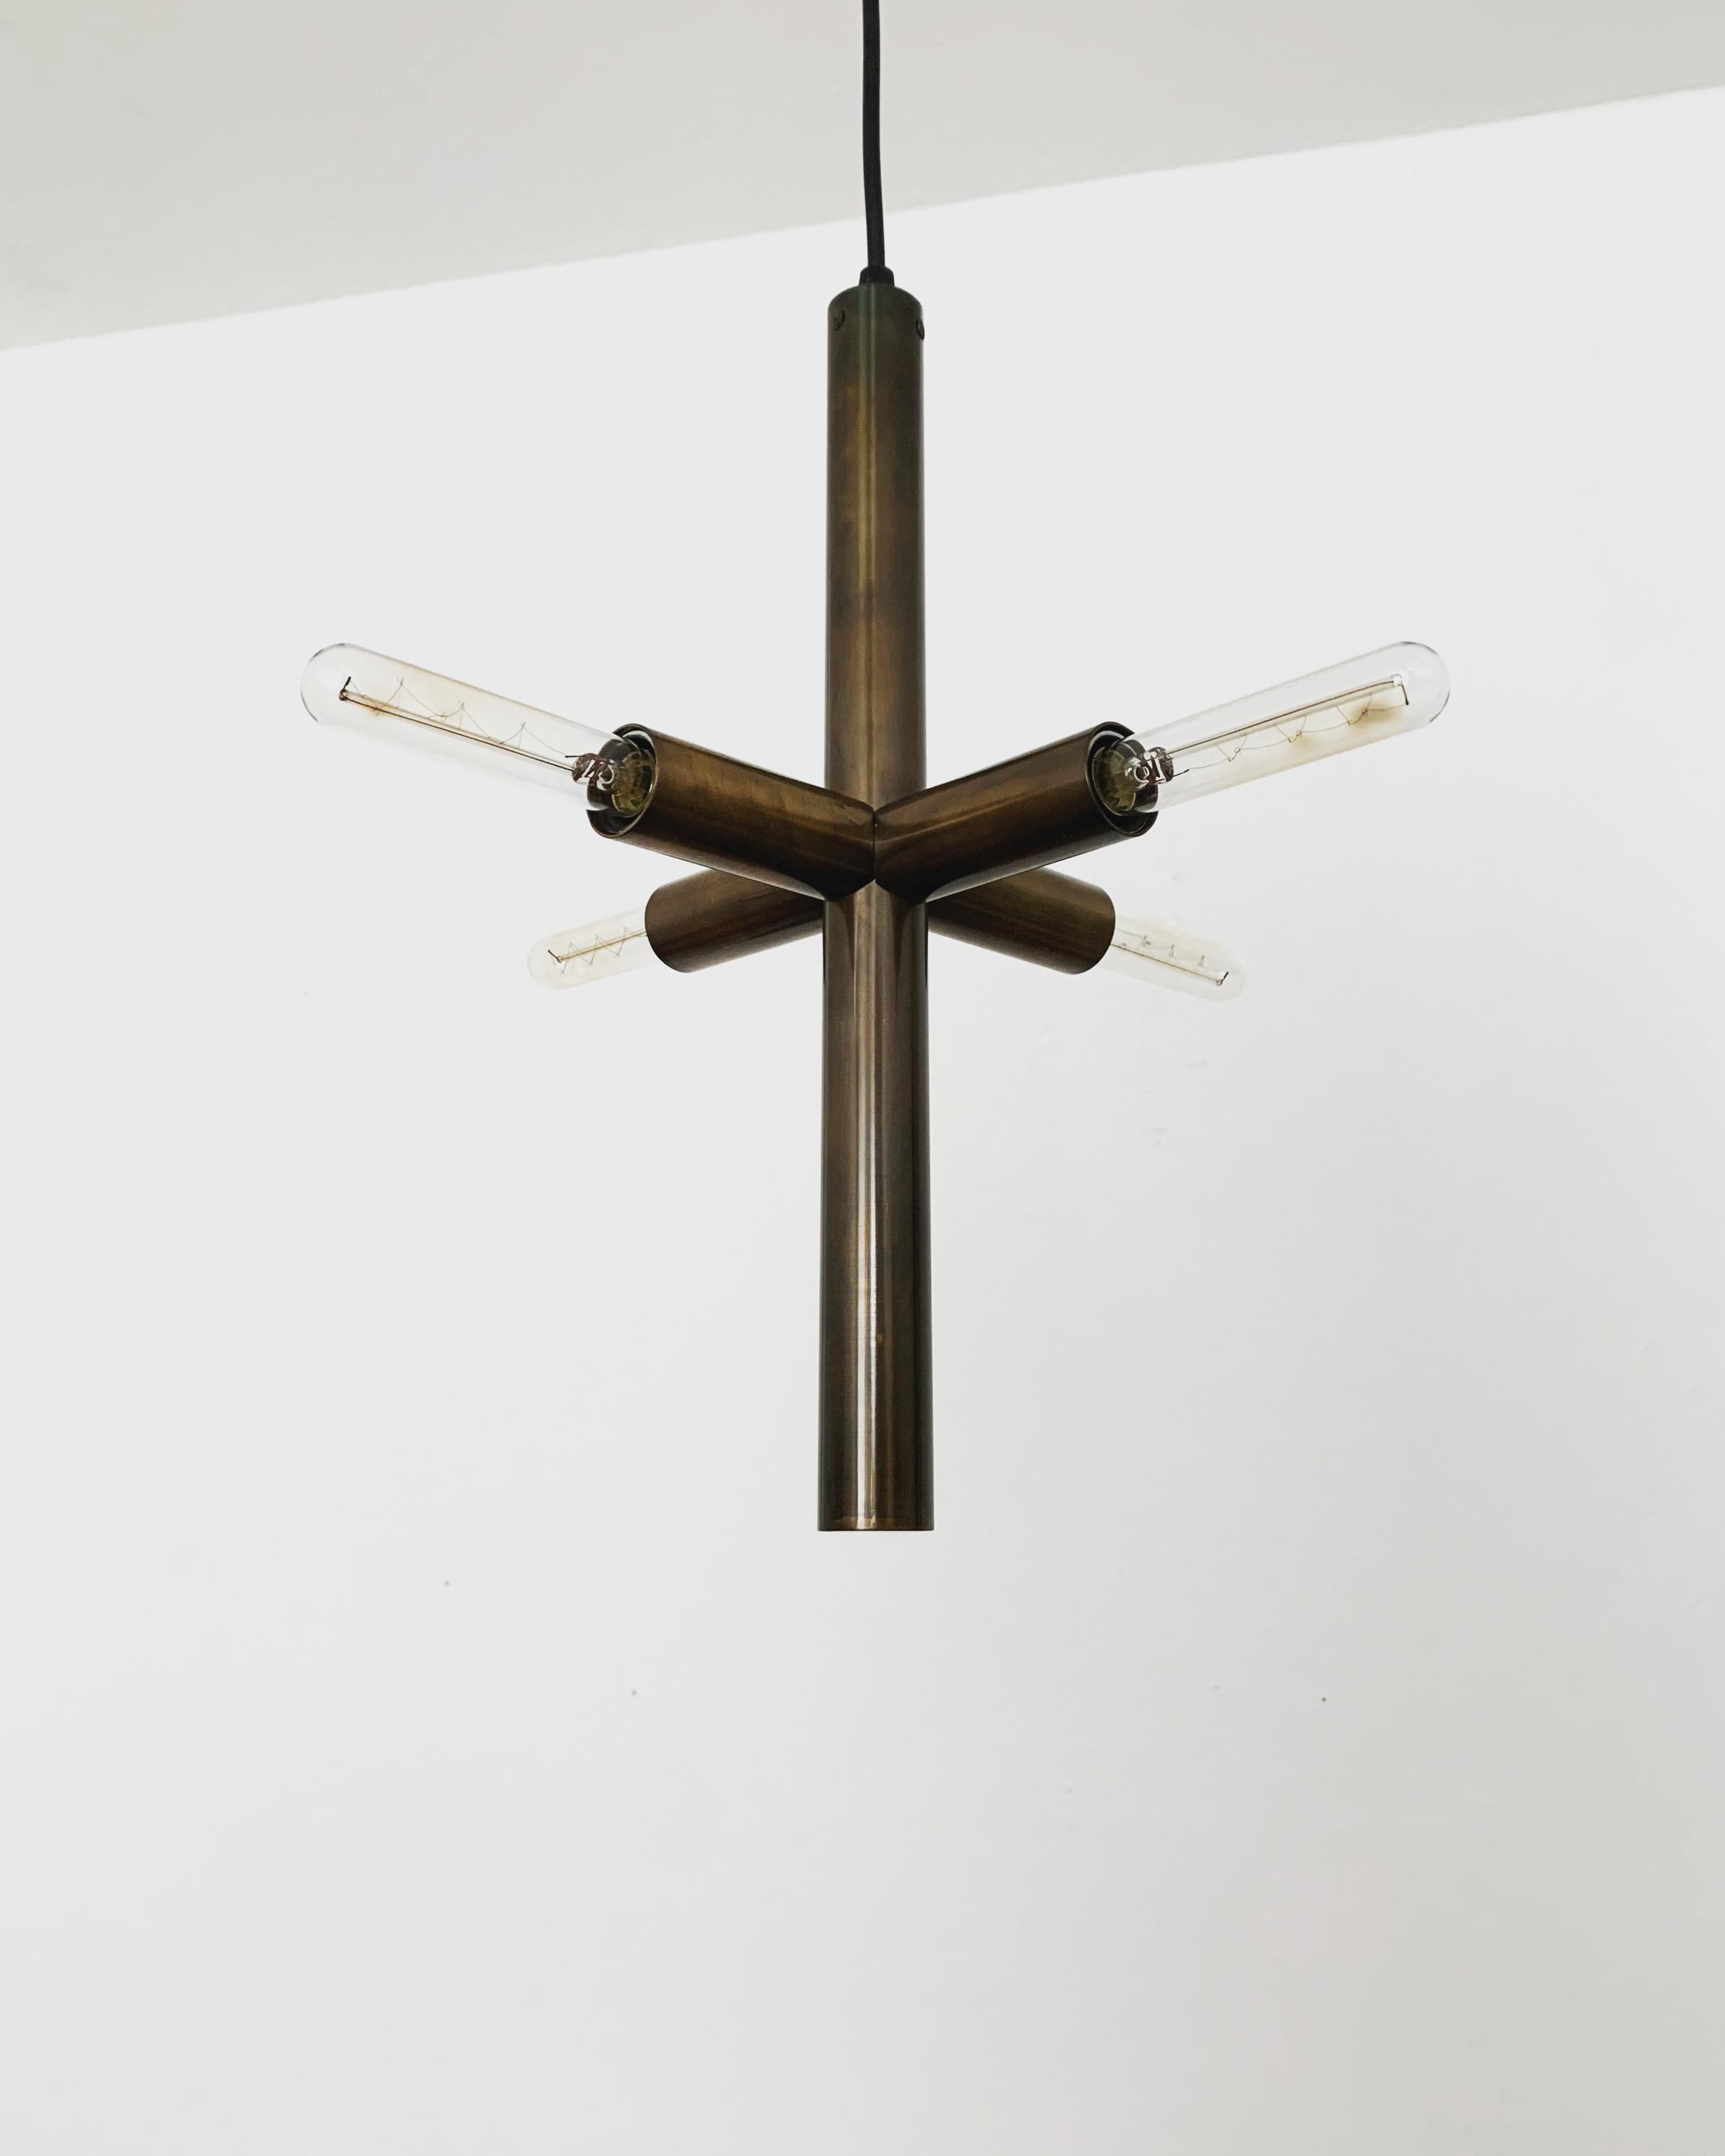 Beautiful brass pendant lamp from the 1960s.
Very high quality workmanship and fantastic reduced design.

Condition:

Very good vintage condition with slight signs of wear consistent with age.
Minimal patina on the metal parts.

The pictures